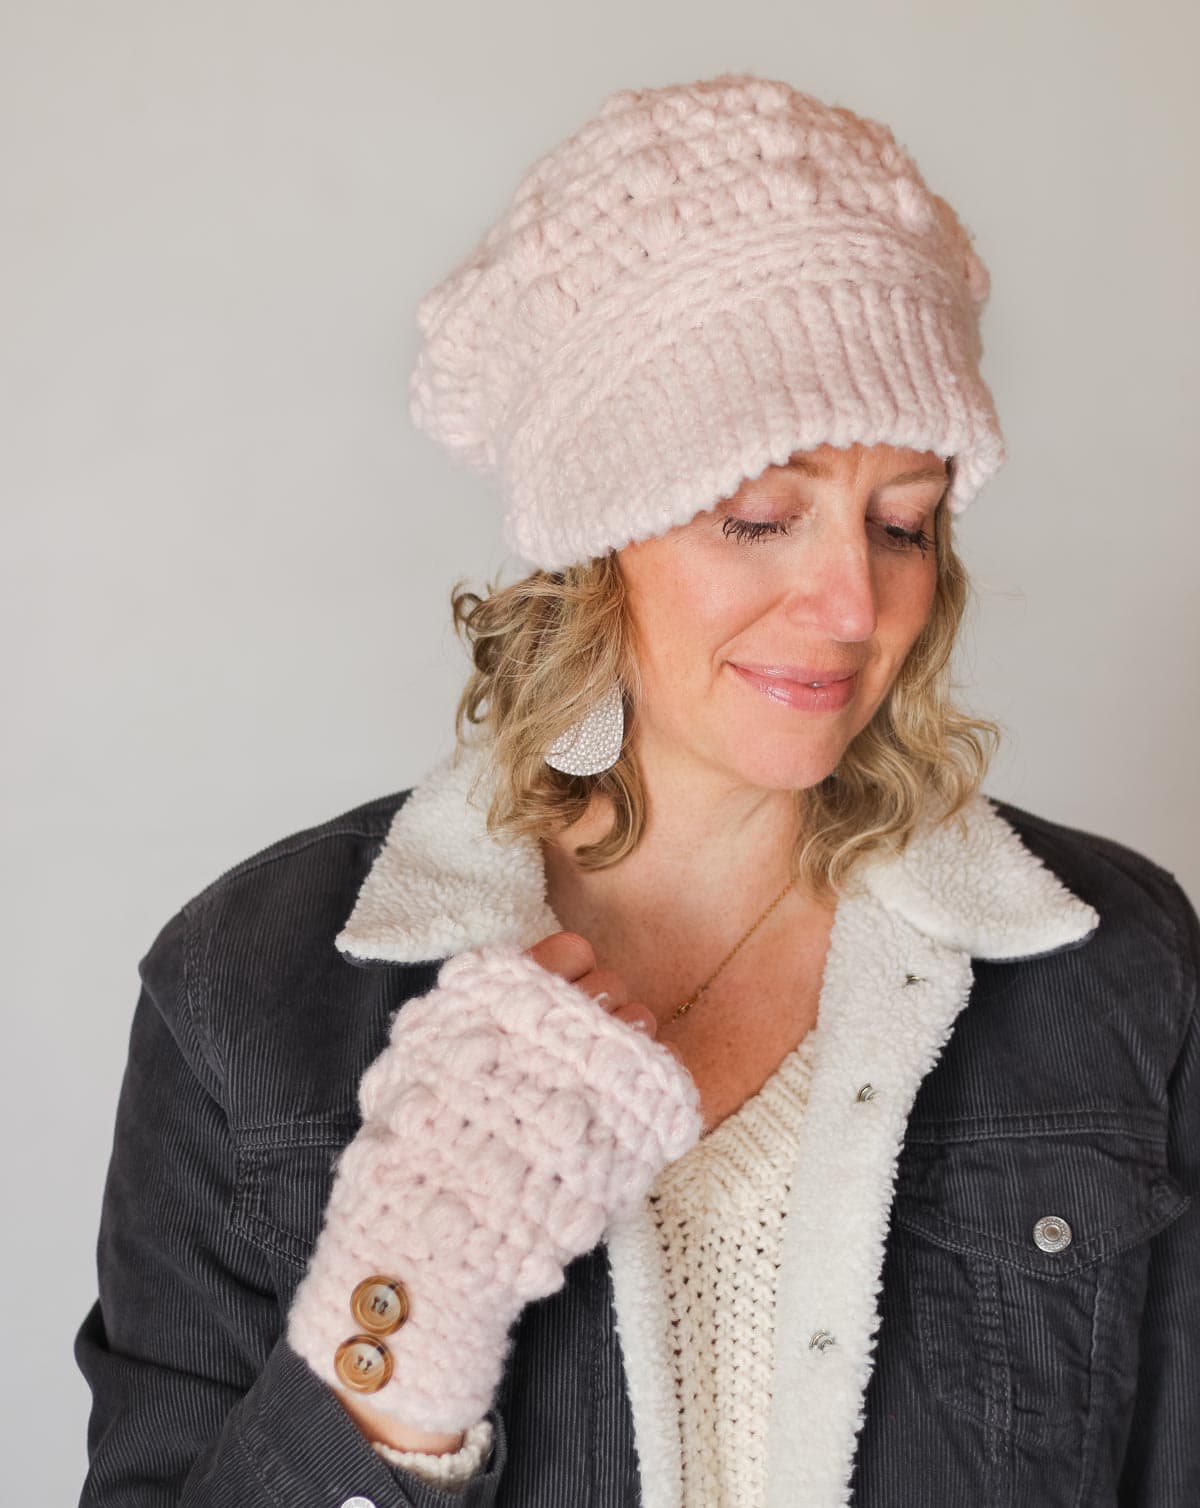 Matching set of crocheted newsboy hat and hand warmers modeled by a woman indoors.